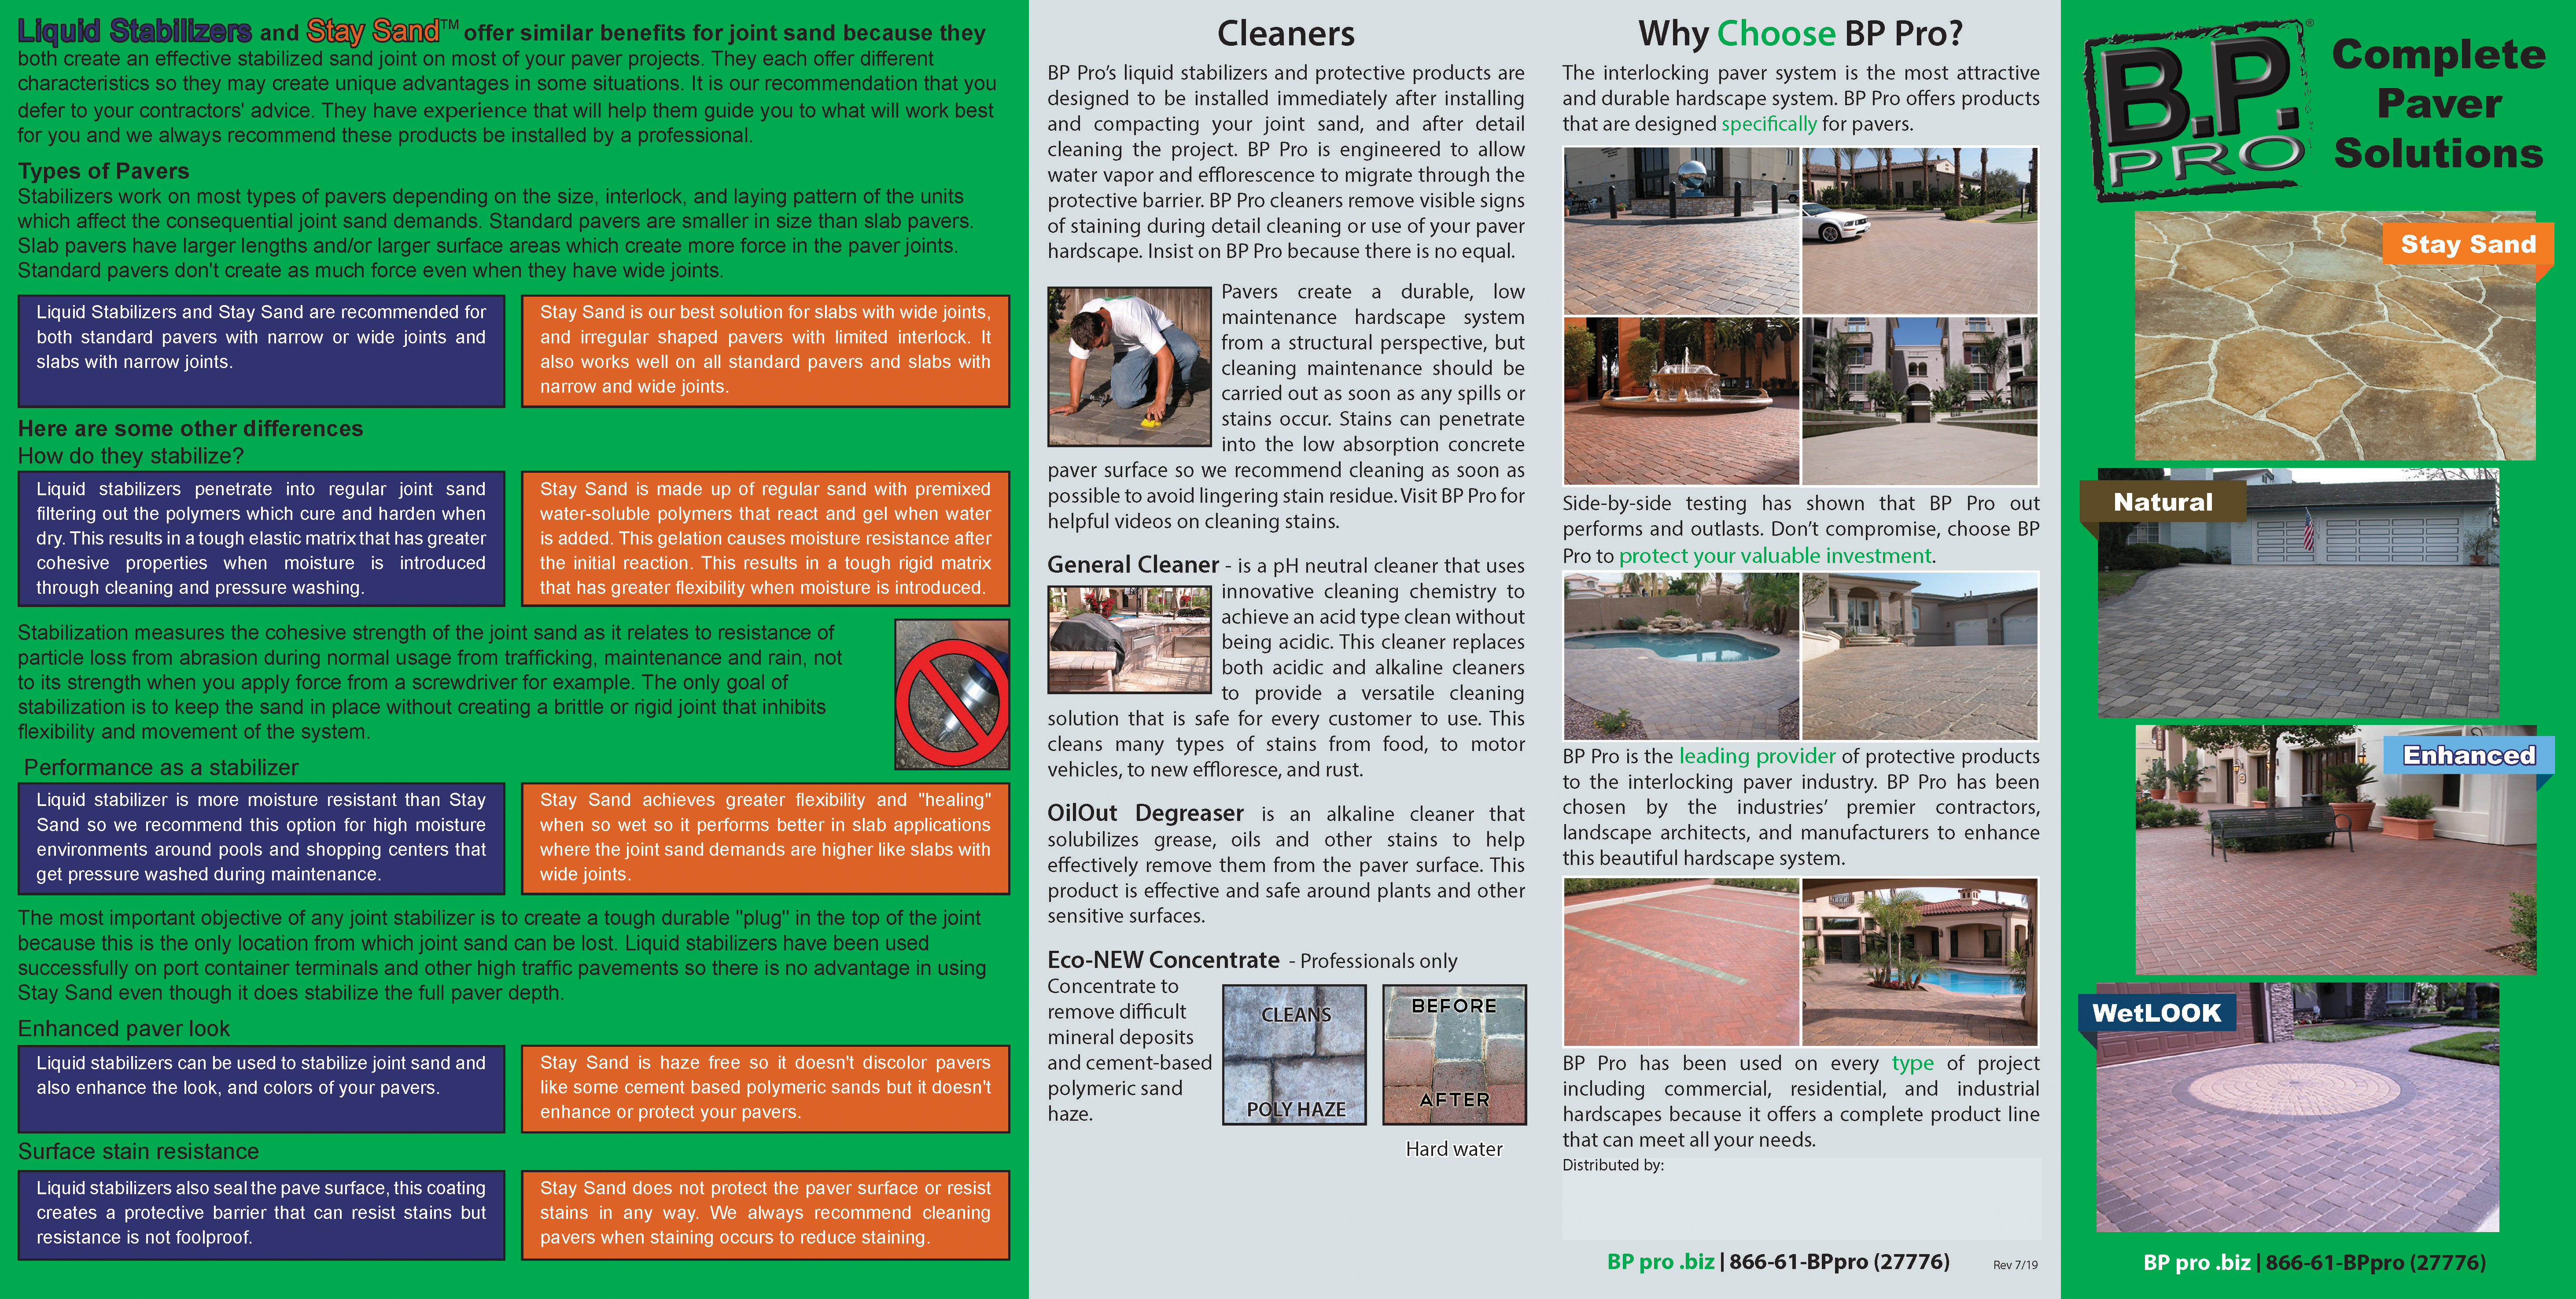 2019 Complete Paver Solutions Roll-Fold Brochure2